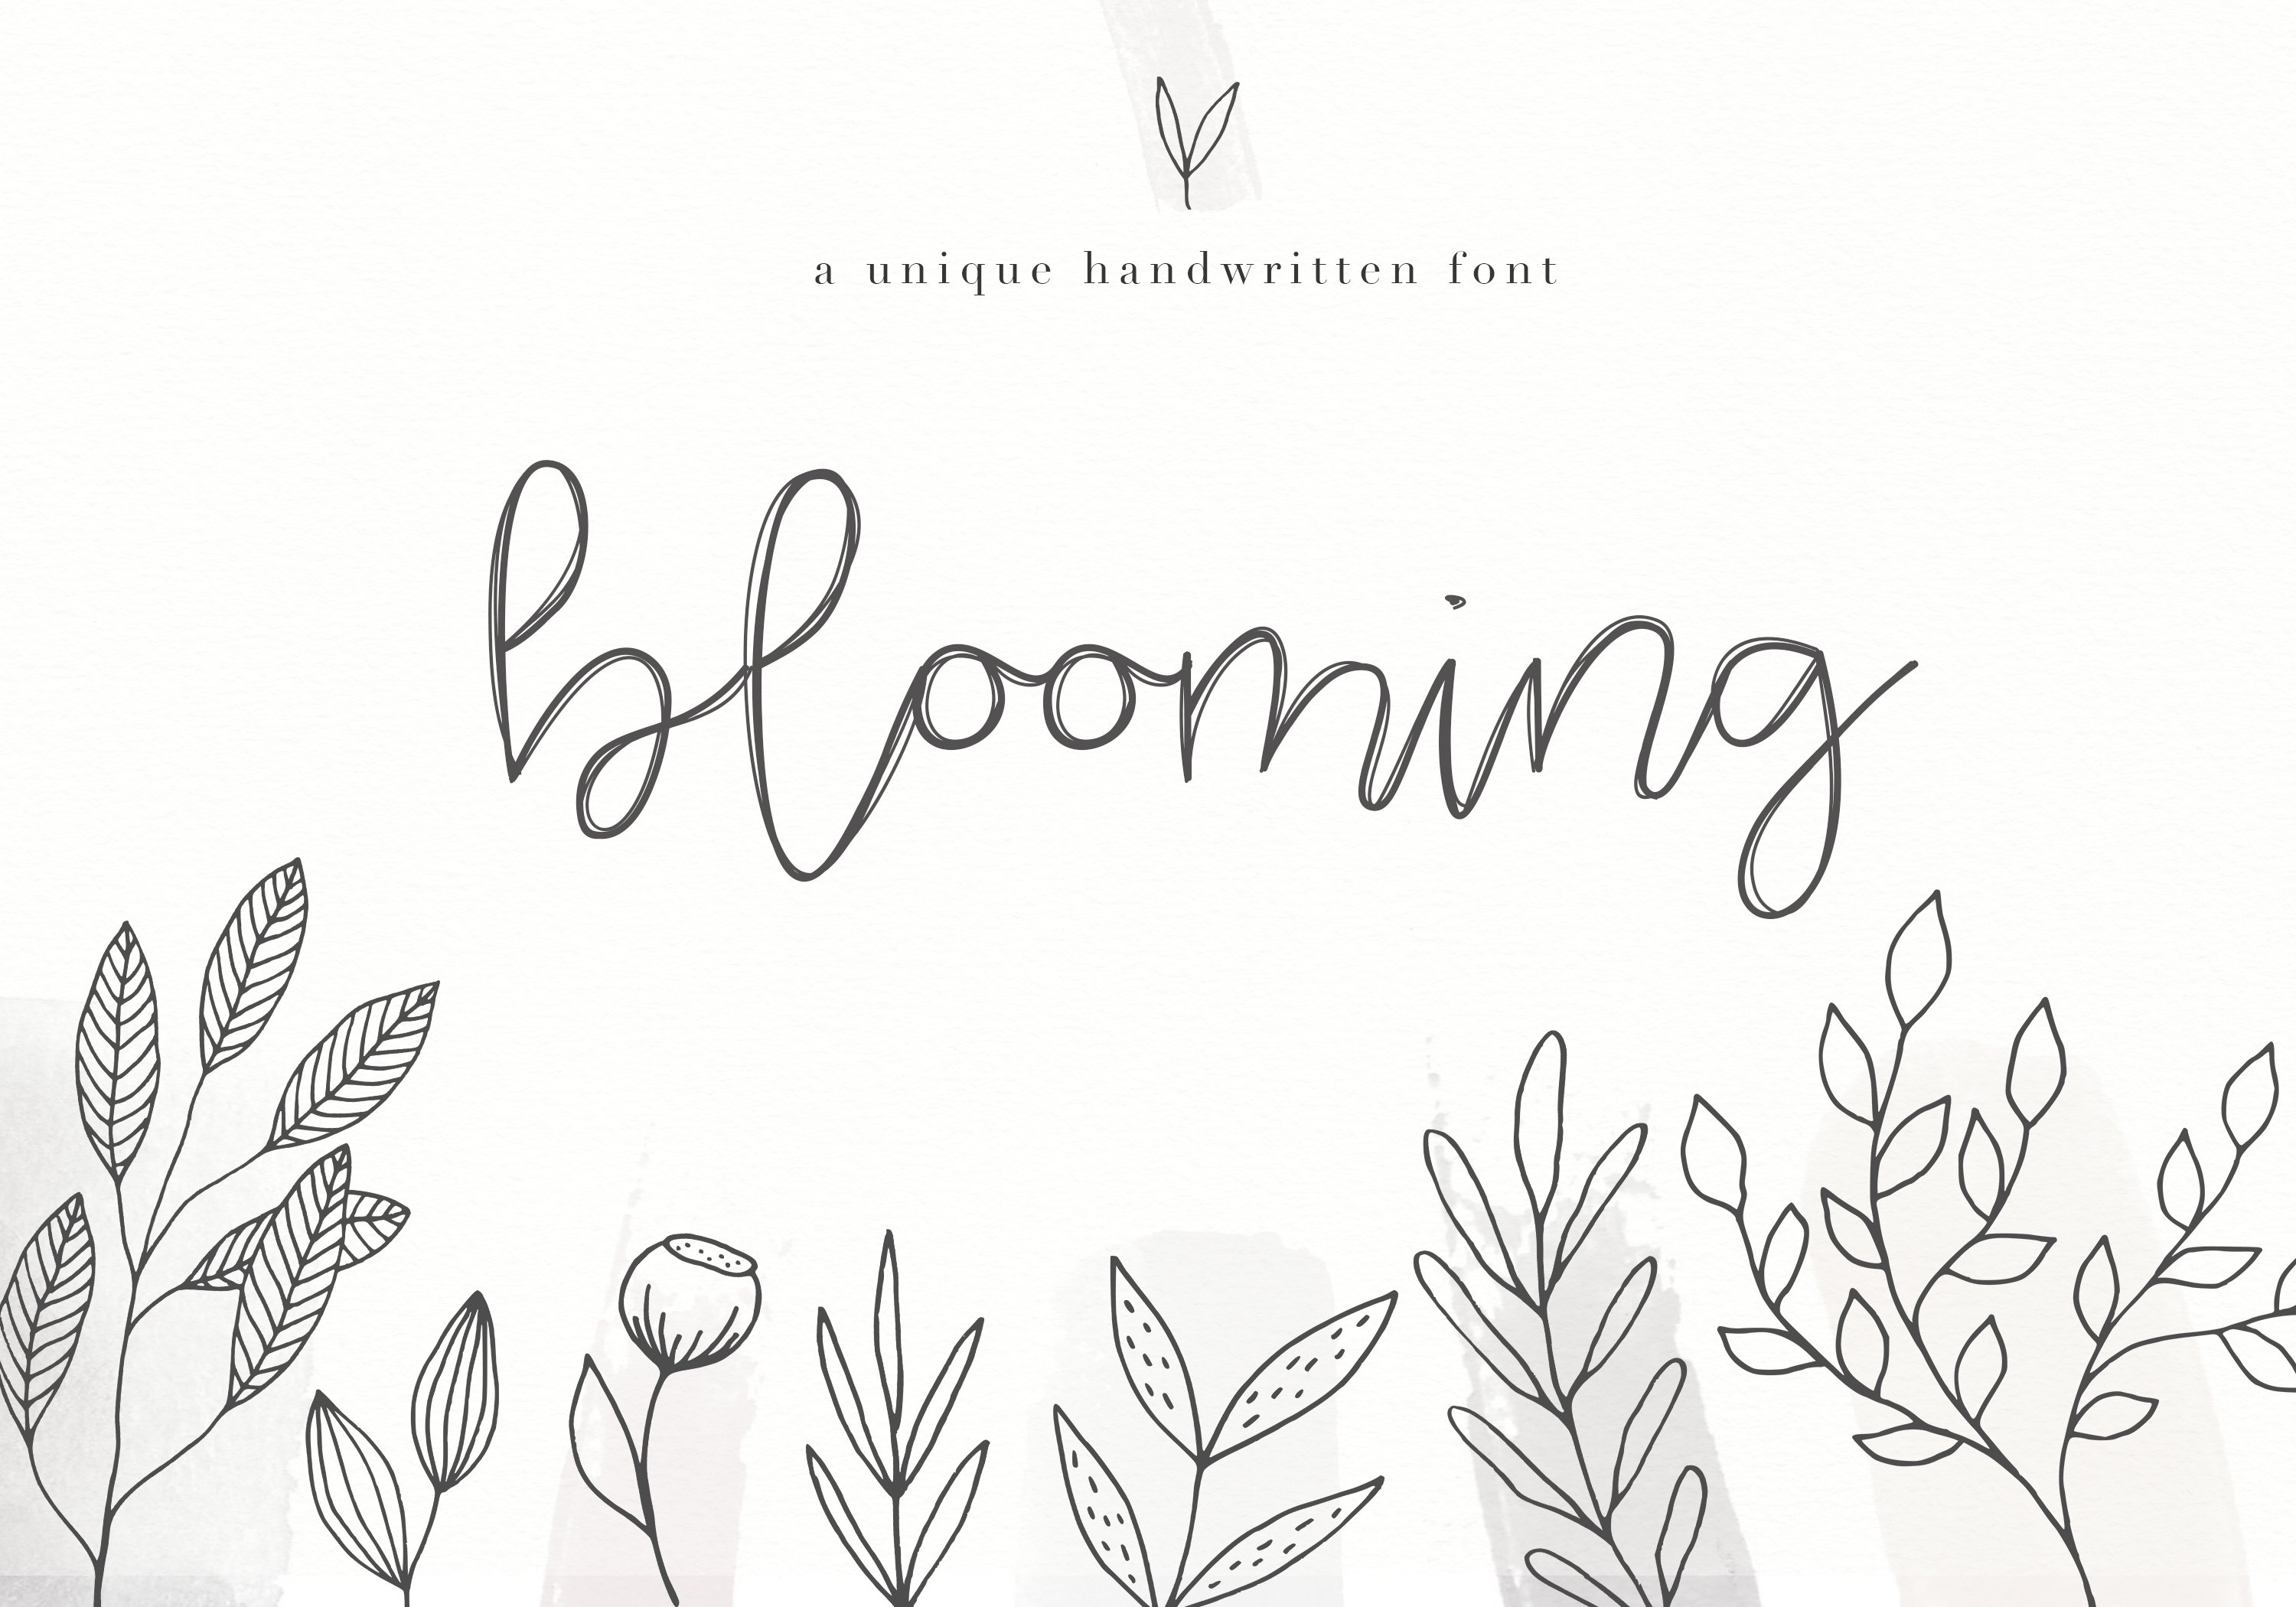 Blooming - Handwritten Font cover image.